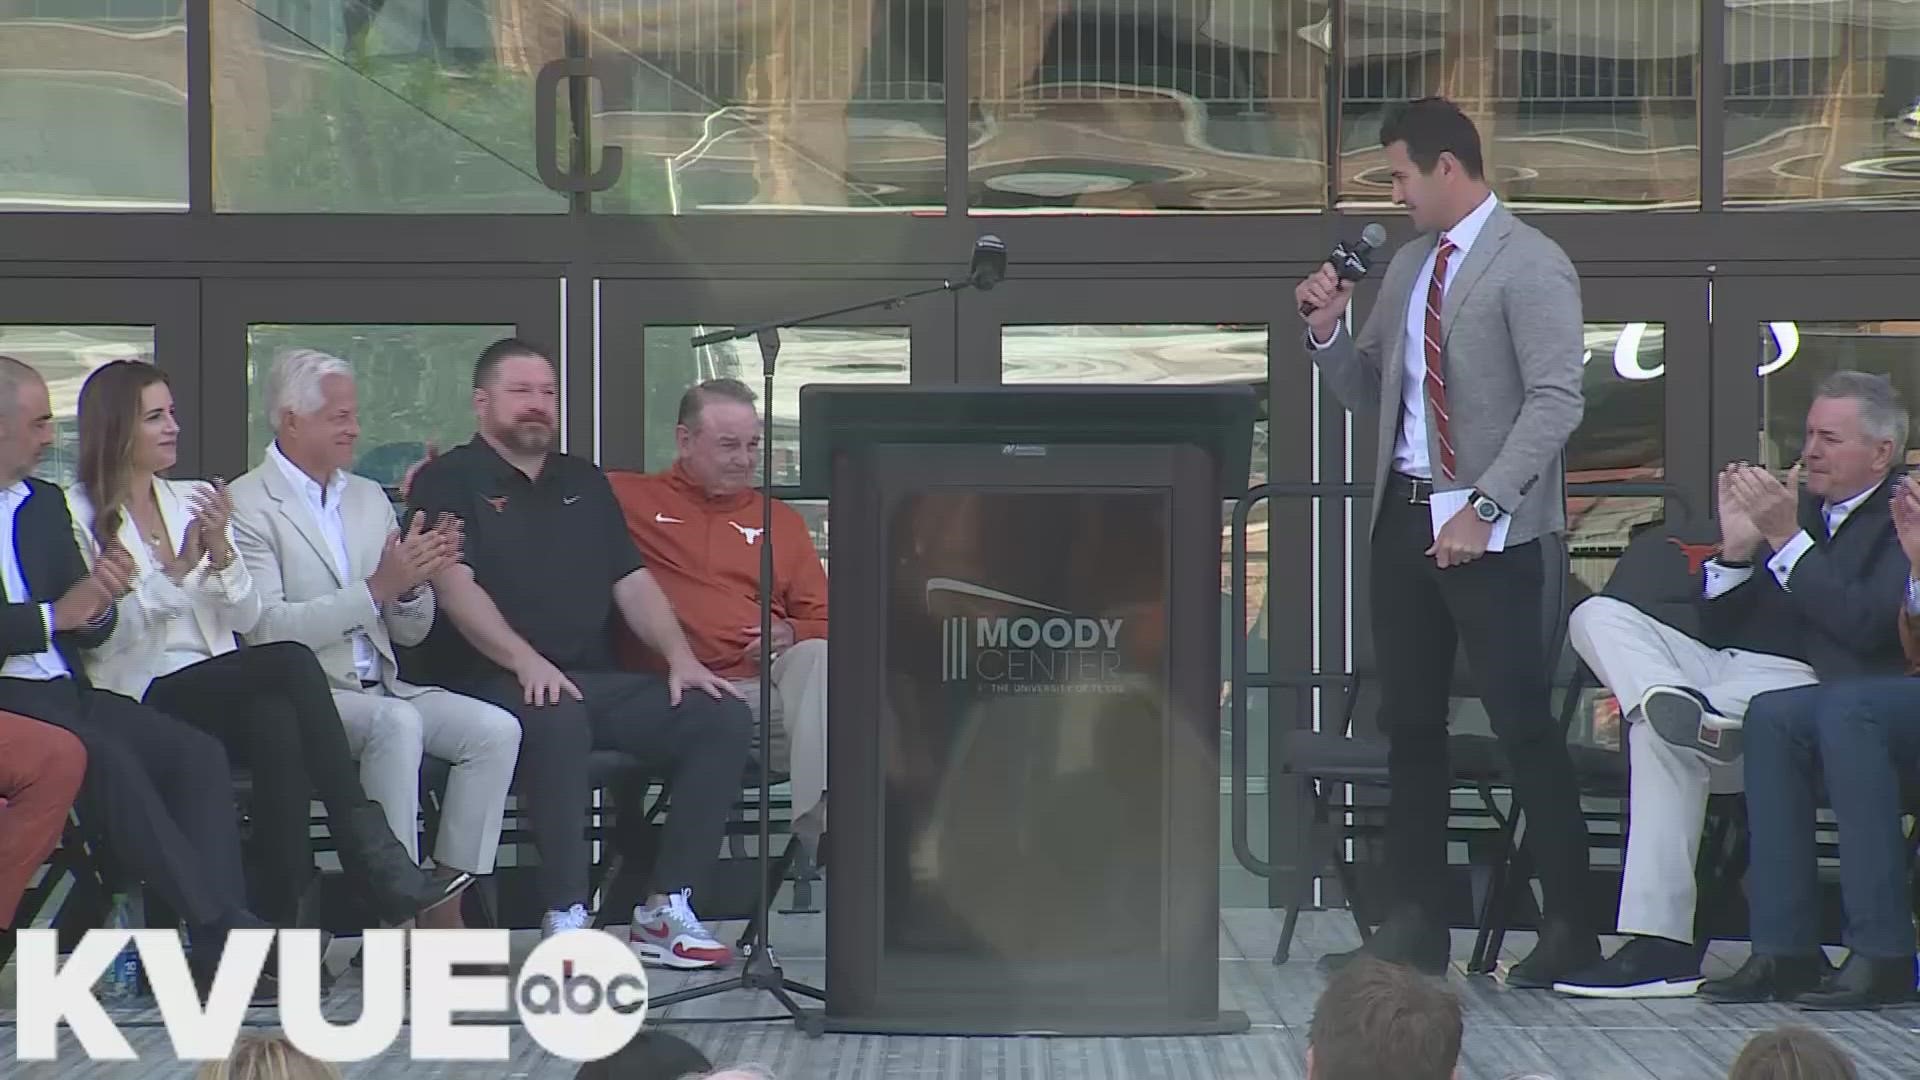 “It is time to bless the Mood,” McConaughey proclaimed at the ribbon-cutting ceremony for the Moody Center on April 19.